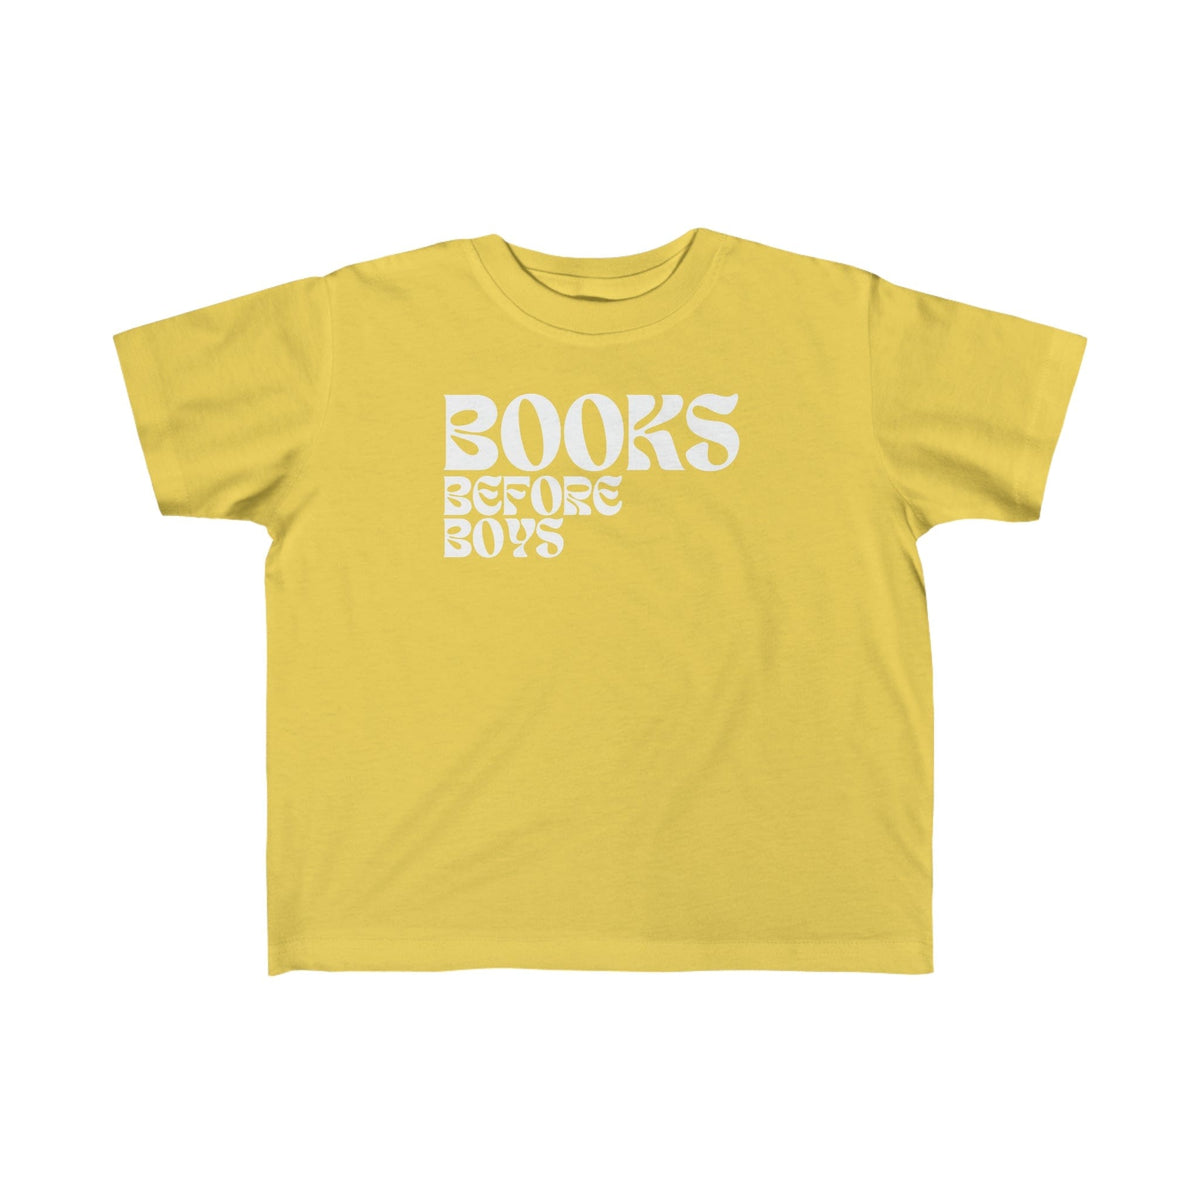 Books Before Boys Toddler Tee | Cute Girls Shirt Kids clothes TheFringeCultureCollective